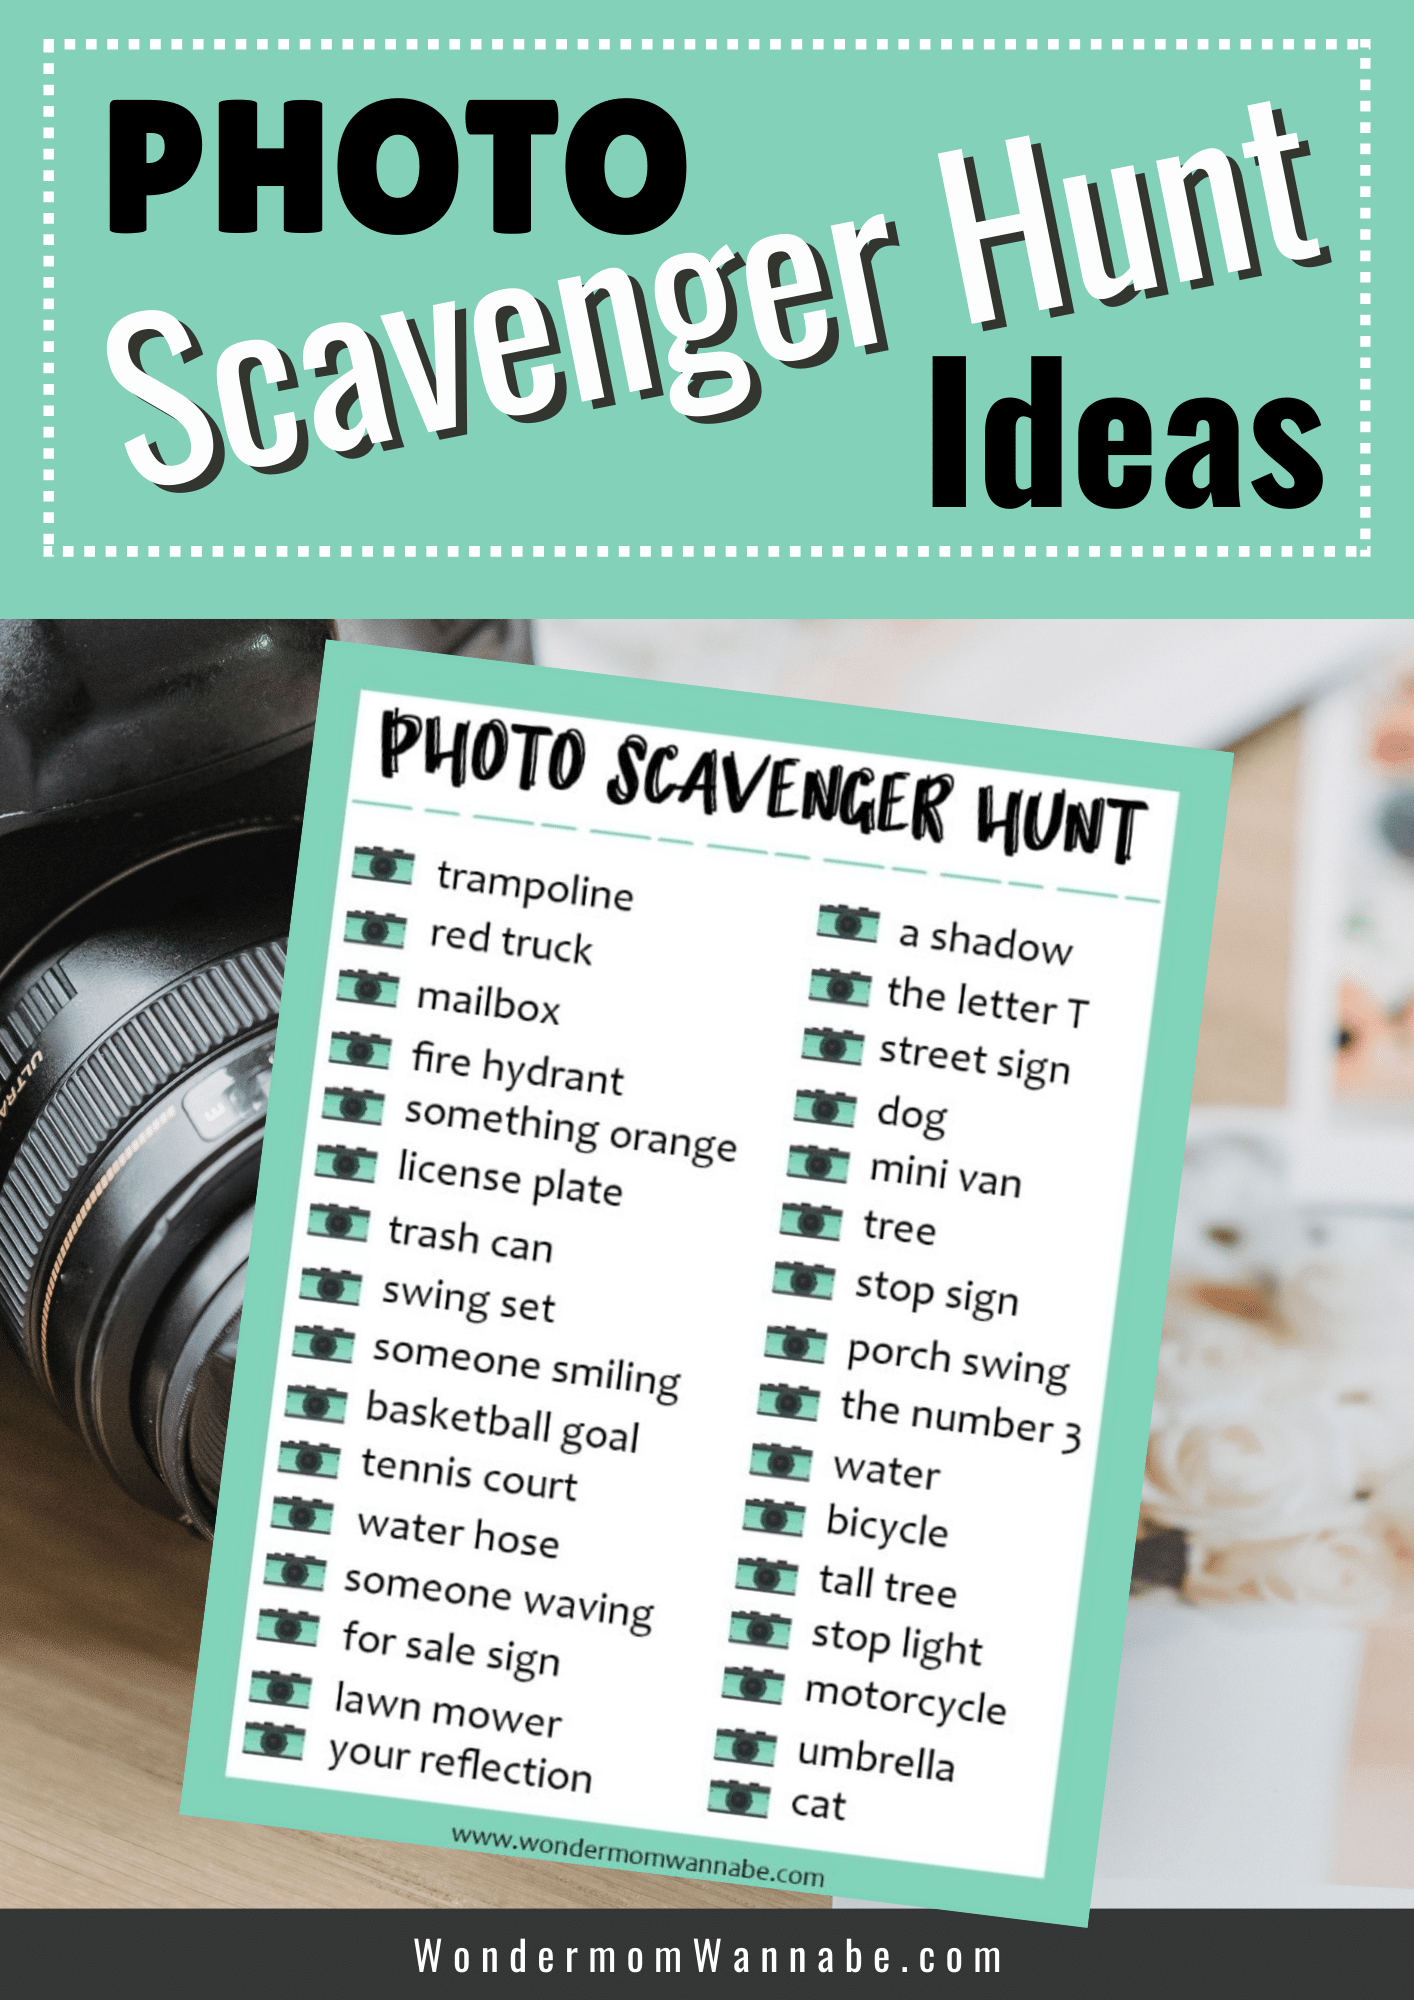 Looking for fun and unique ideas for a photo scavenger hunt? Look no further - our comprehensive guide is packed with exciting photo scavenger hunt suggestions that are sure to bring hours of entertainment. Whether you